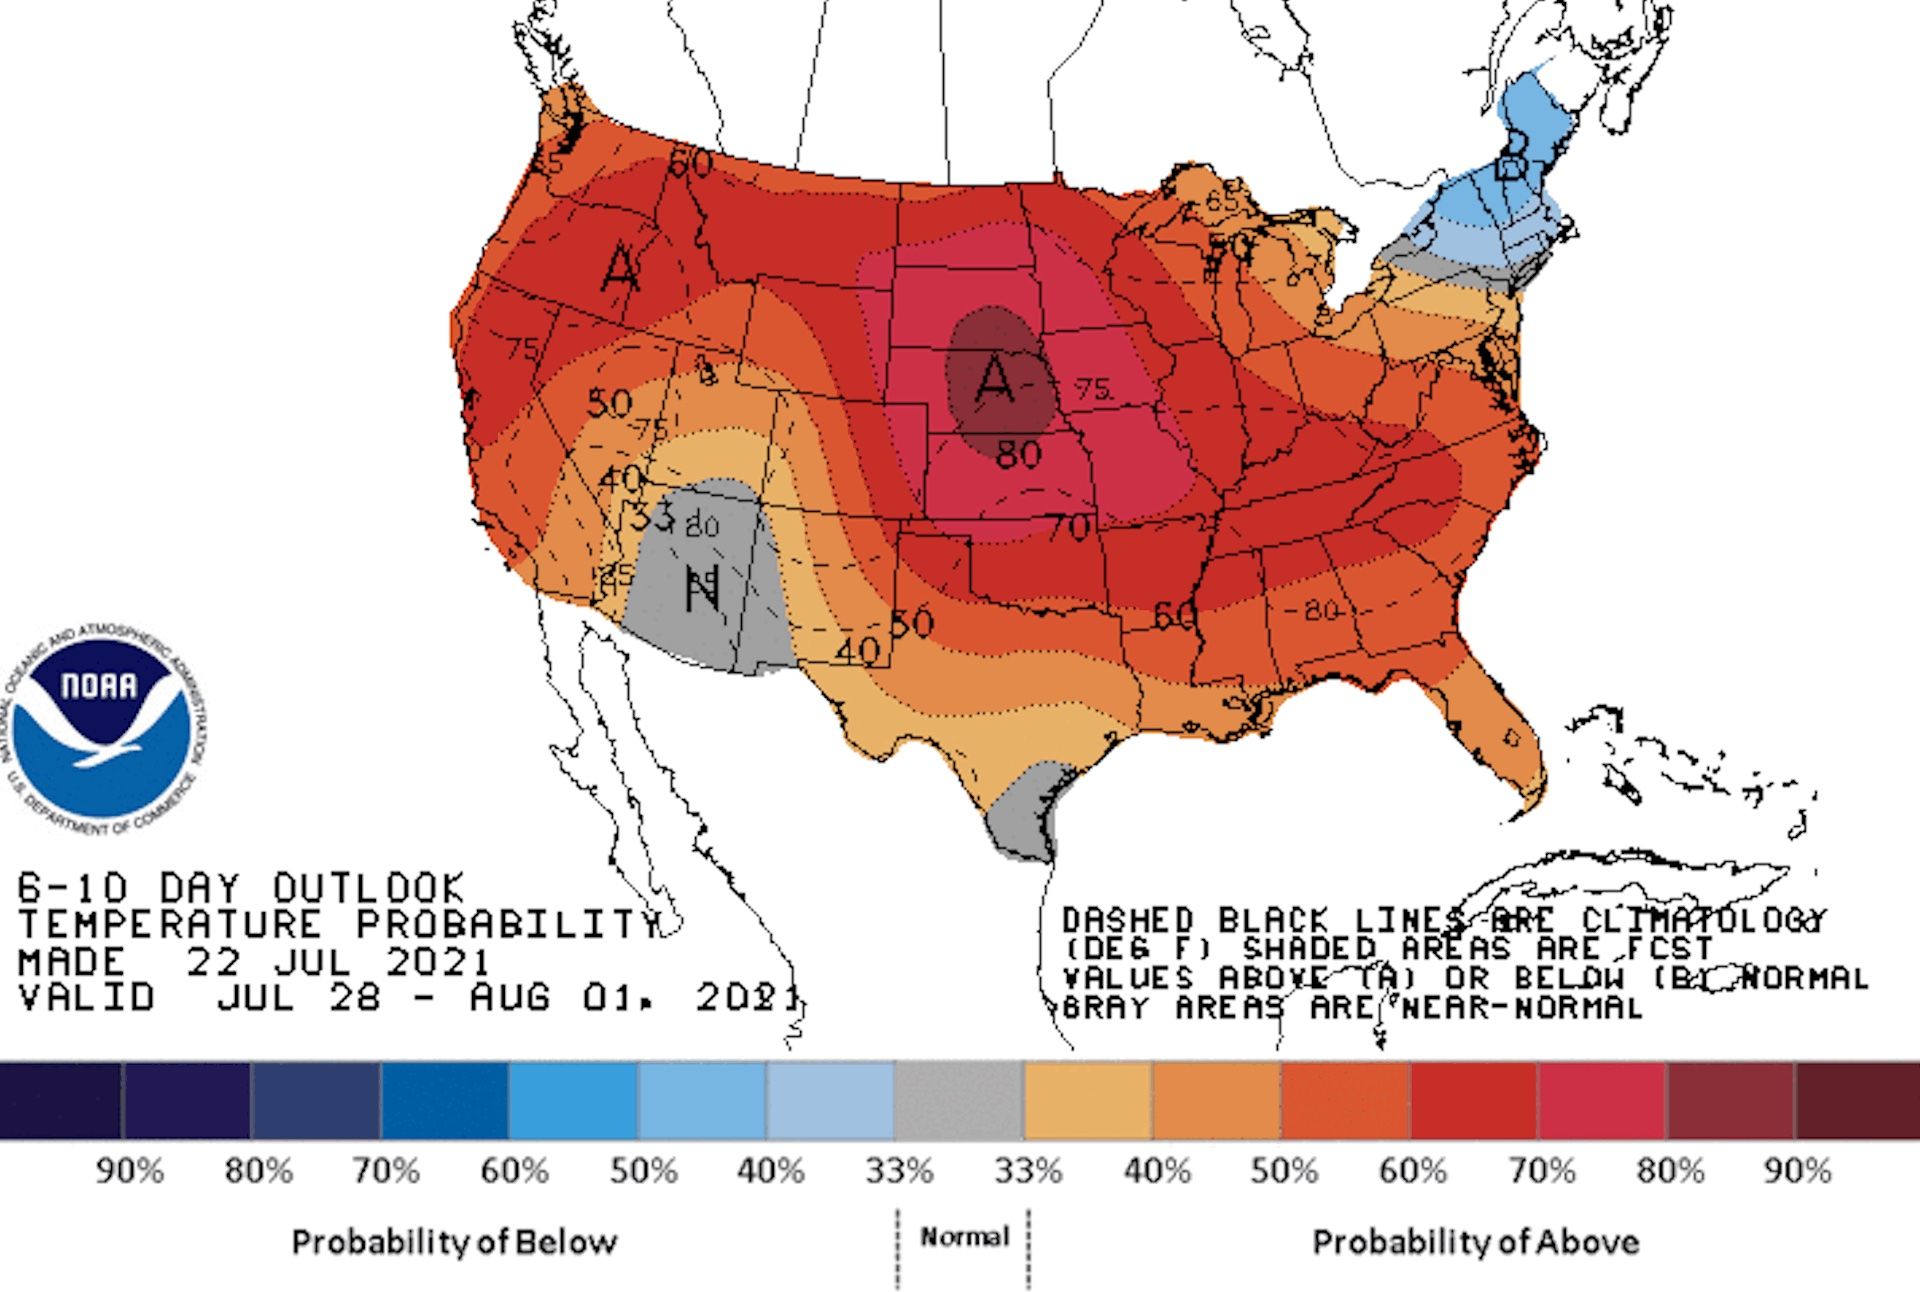 Map with red and blue colors showing temperature outlook across the U.S. in the next week to two weeks.